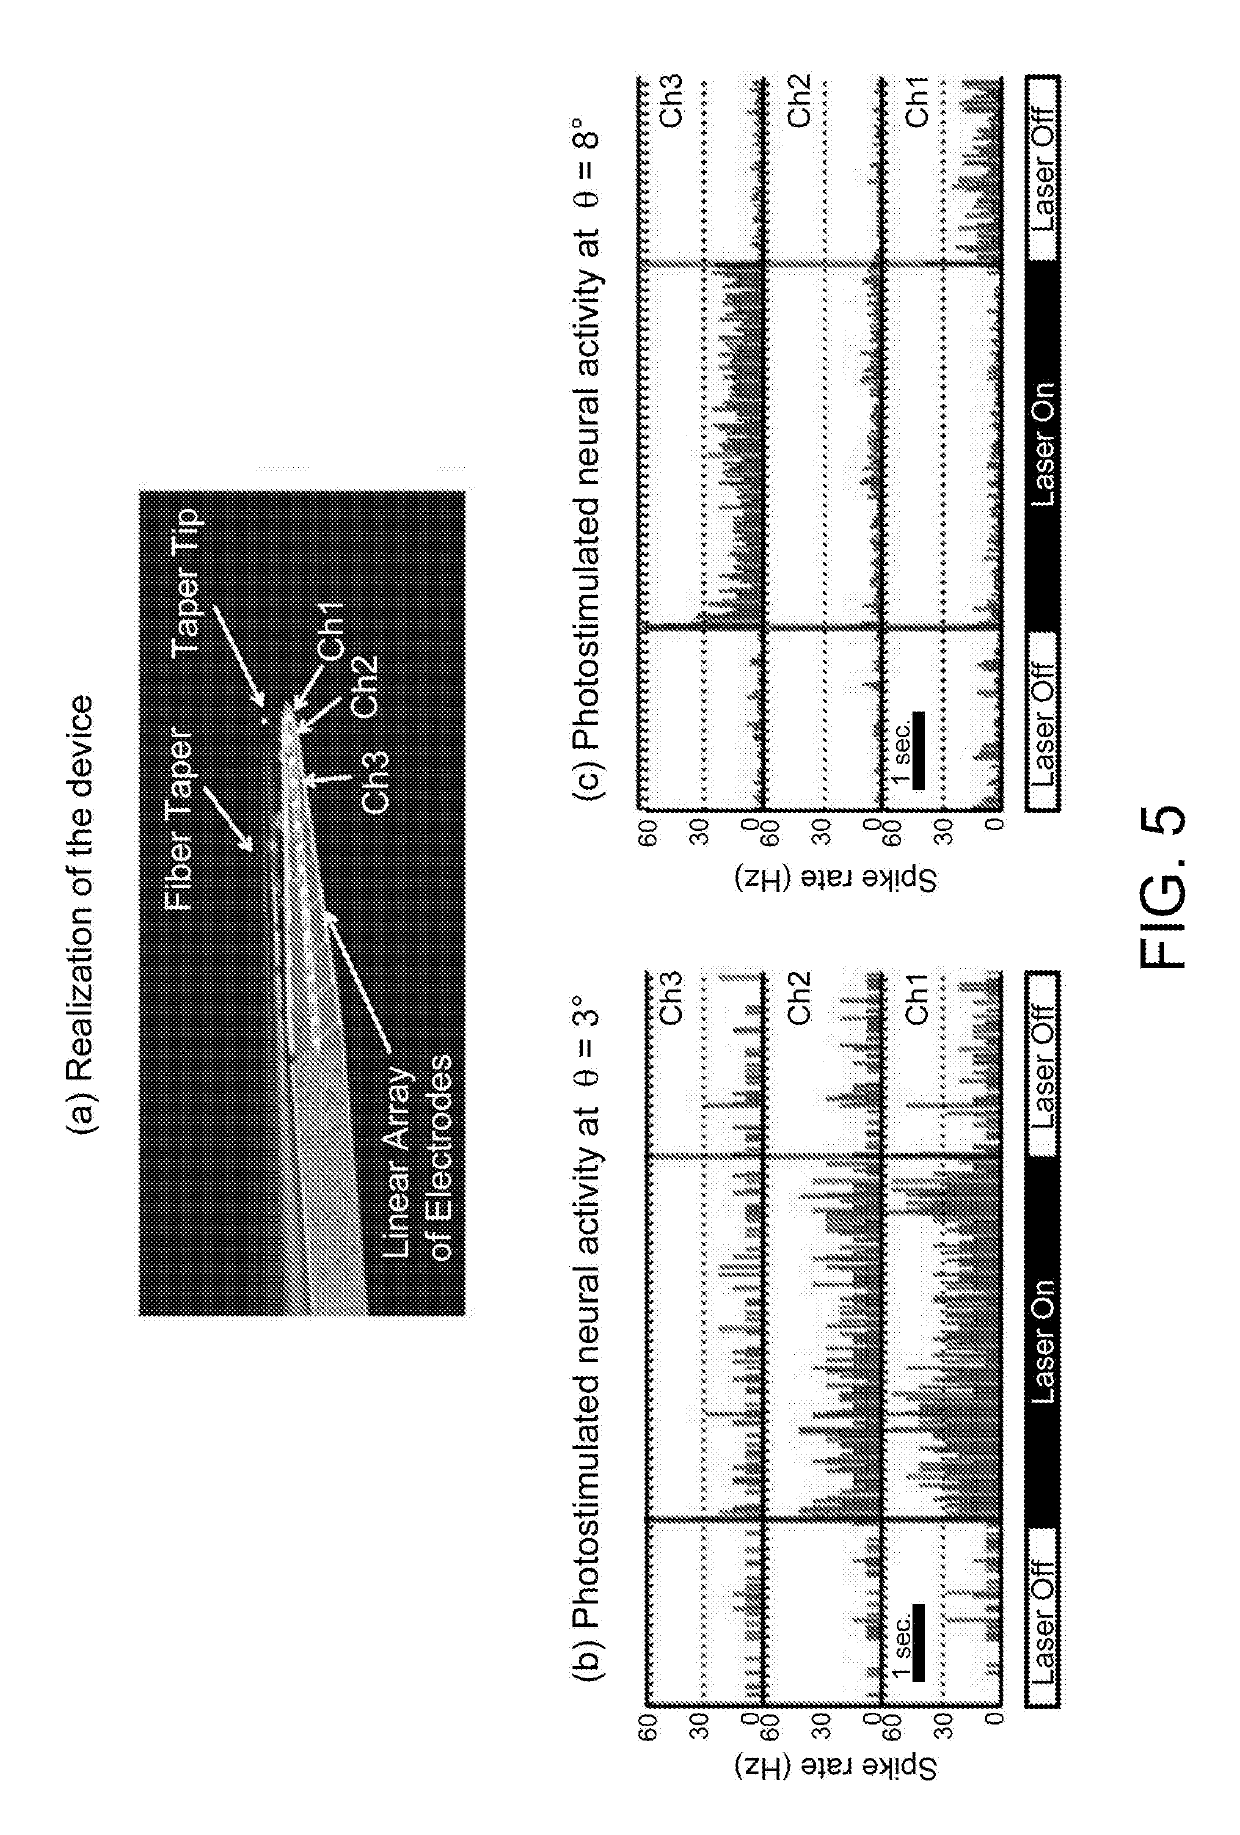 Optogenetic tool for multiple and independently addressing of patterned optical windows